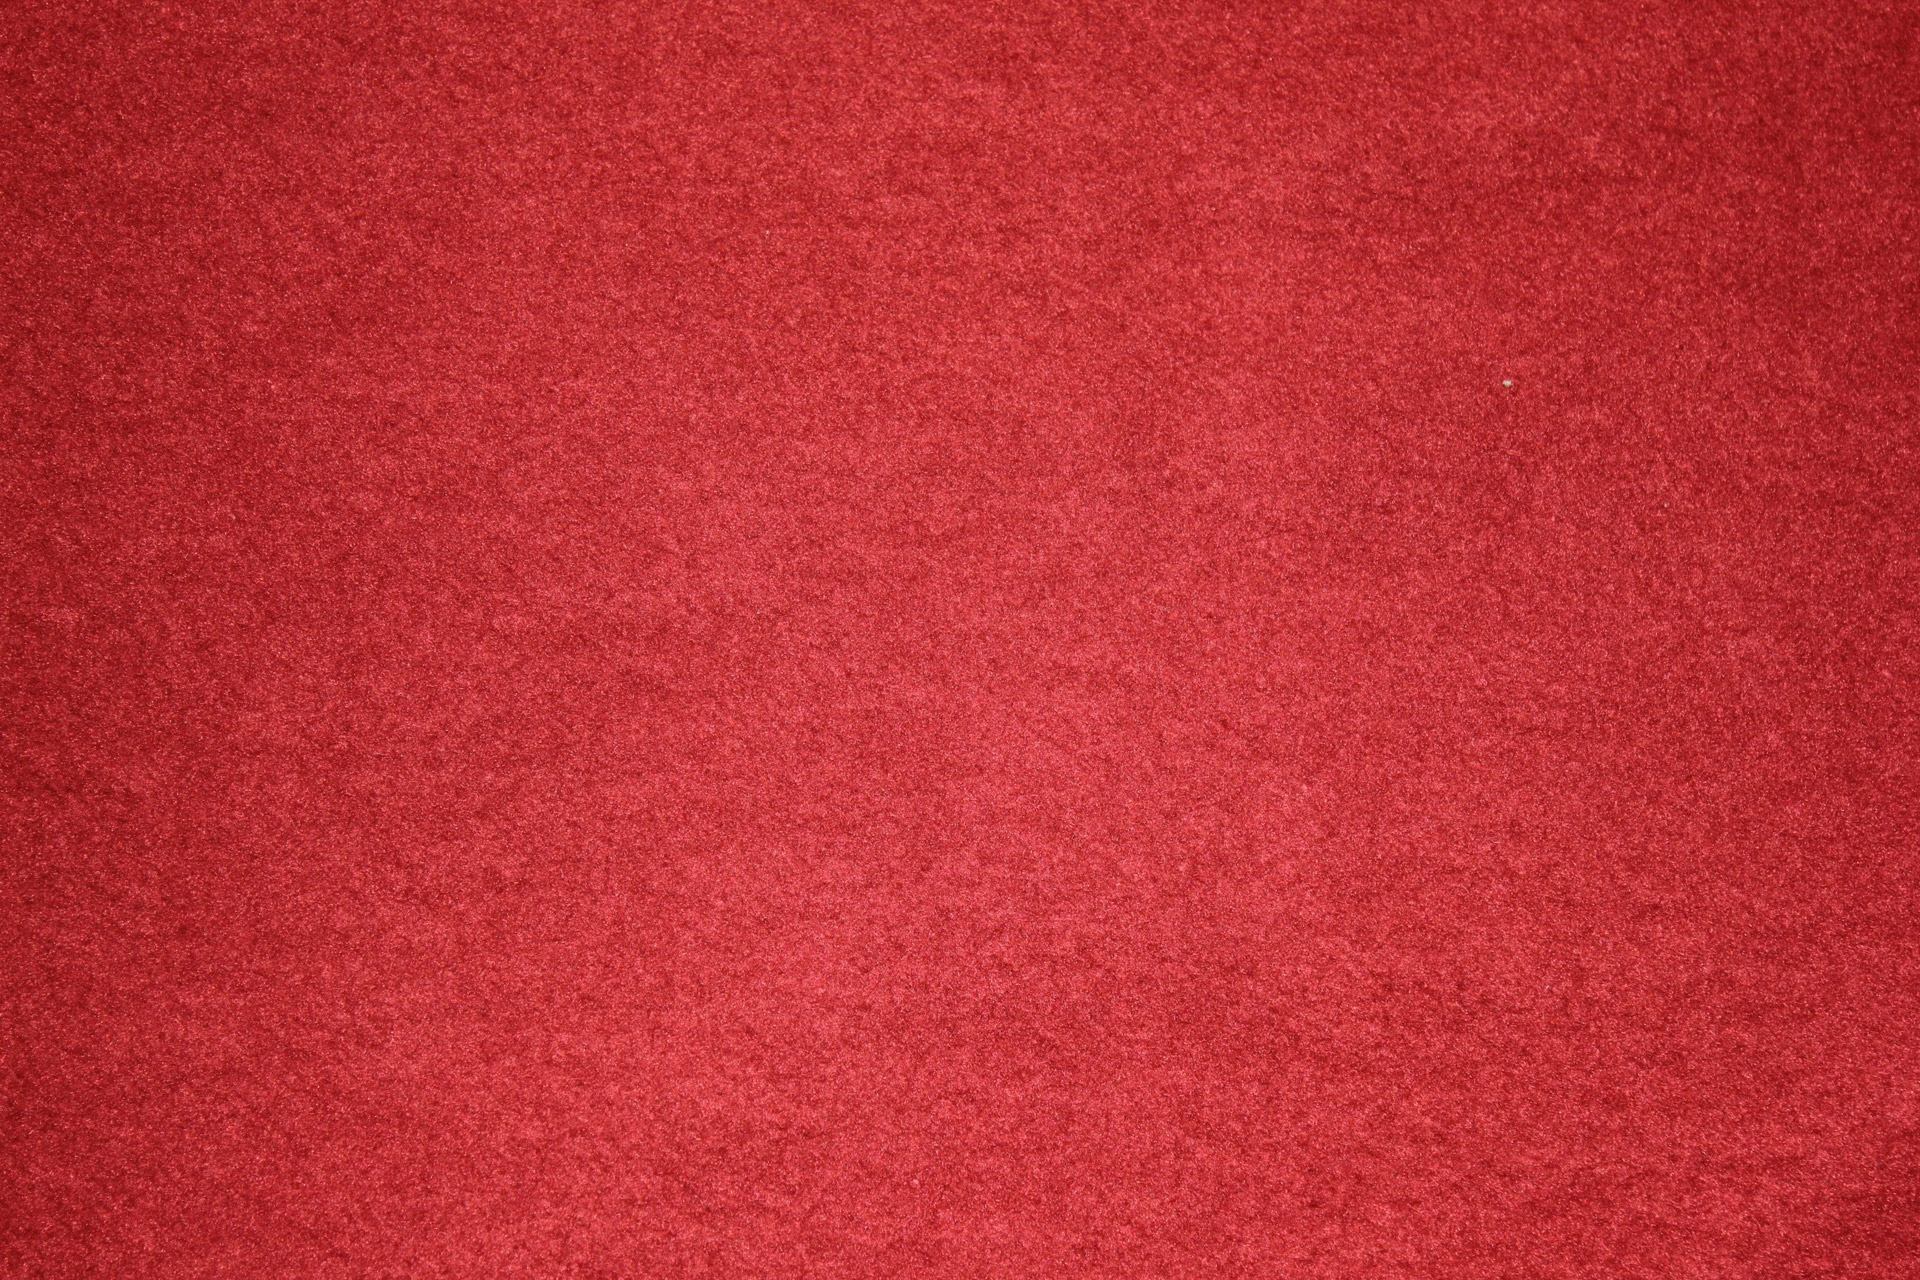 Smooth Red Texture